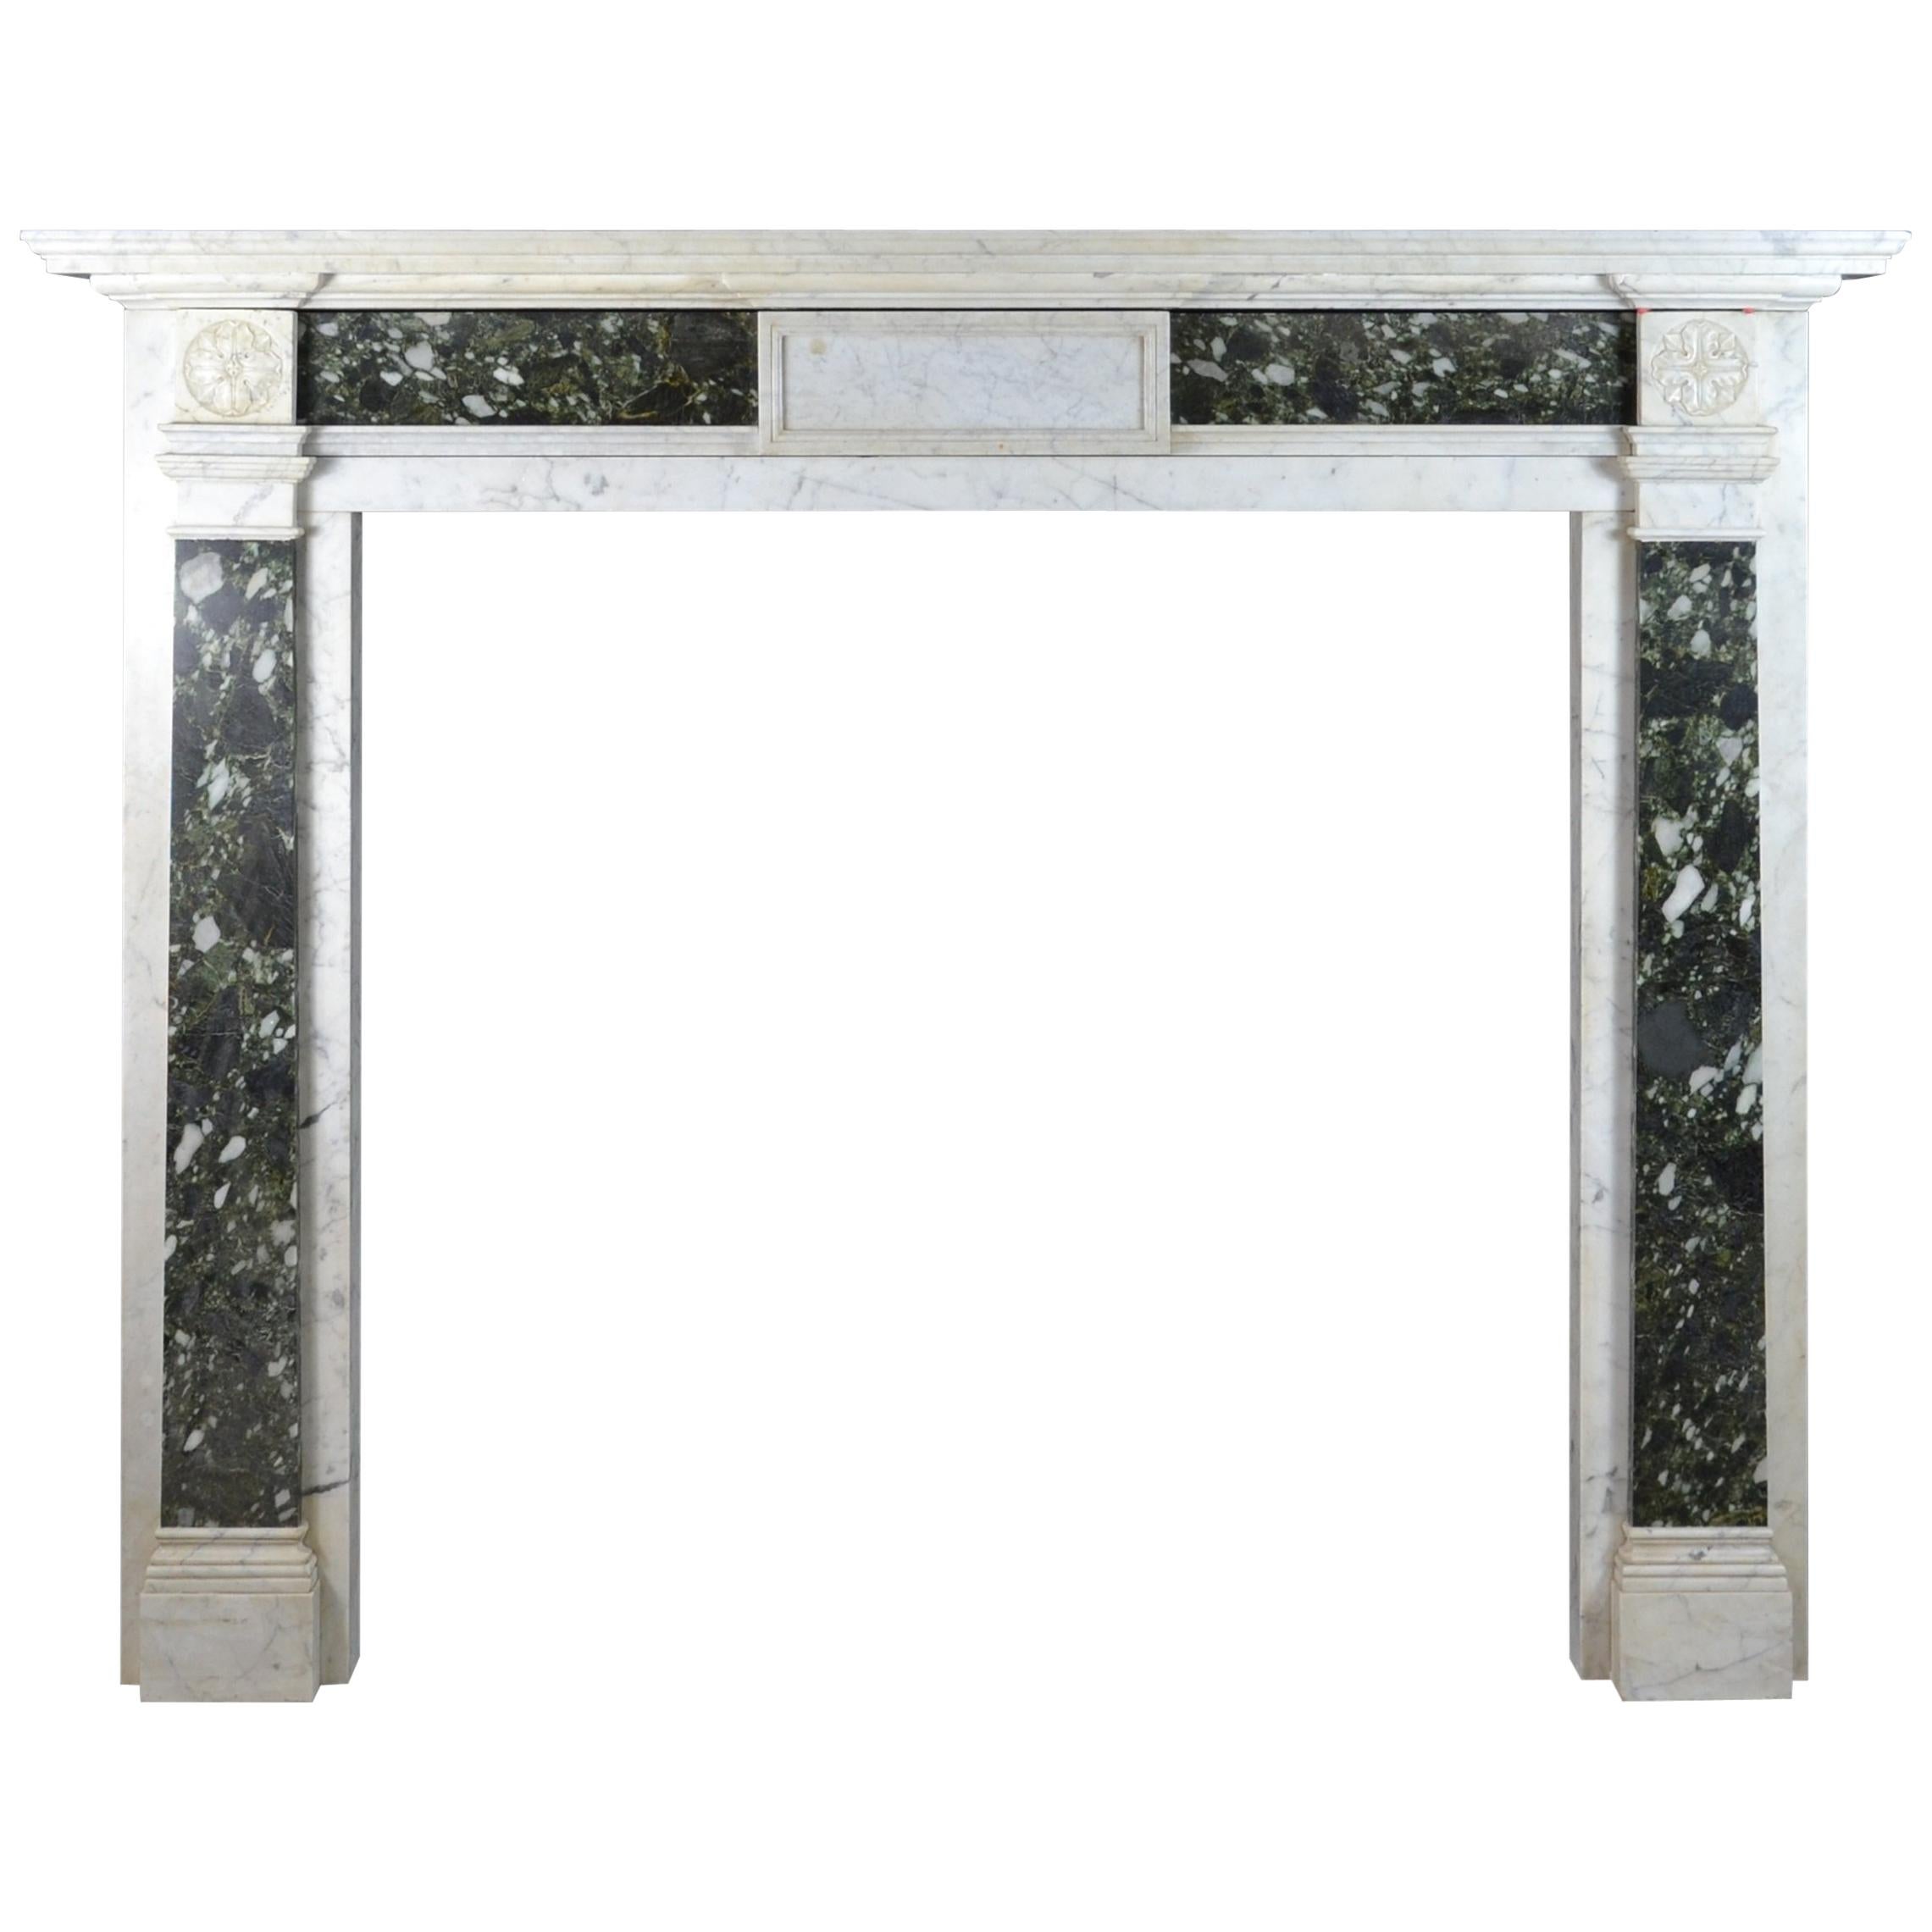 Early 19th Century Mantelpiece in Carrara and Verde Marble